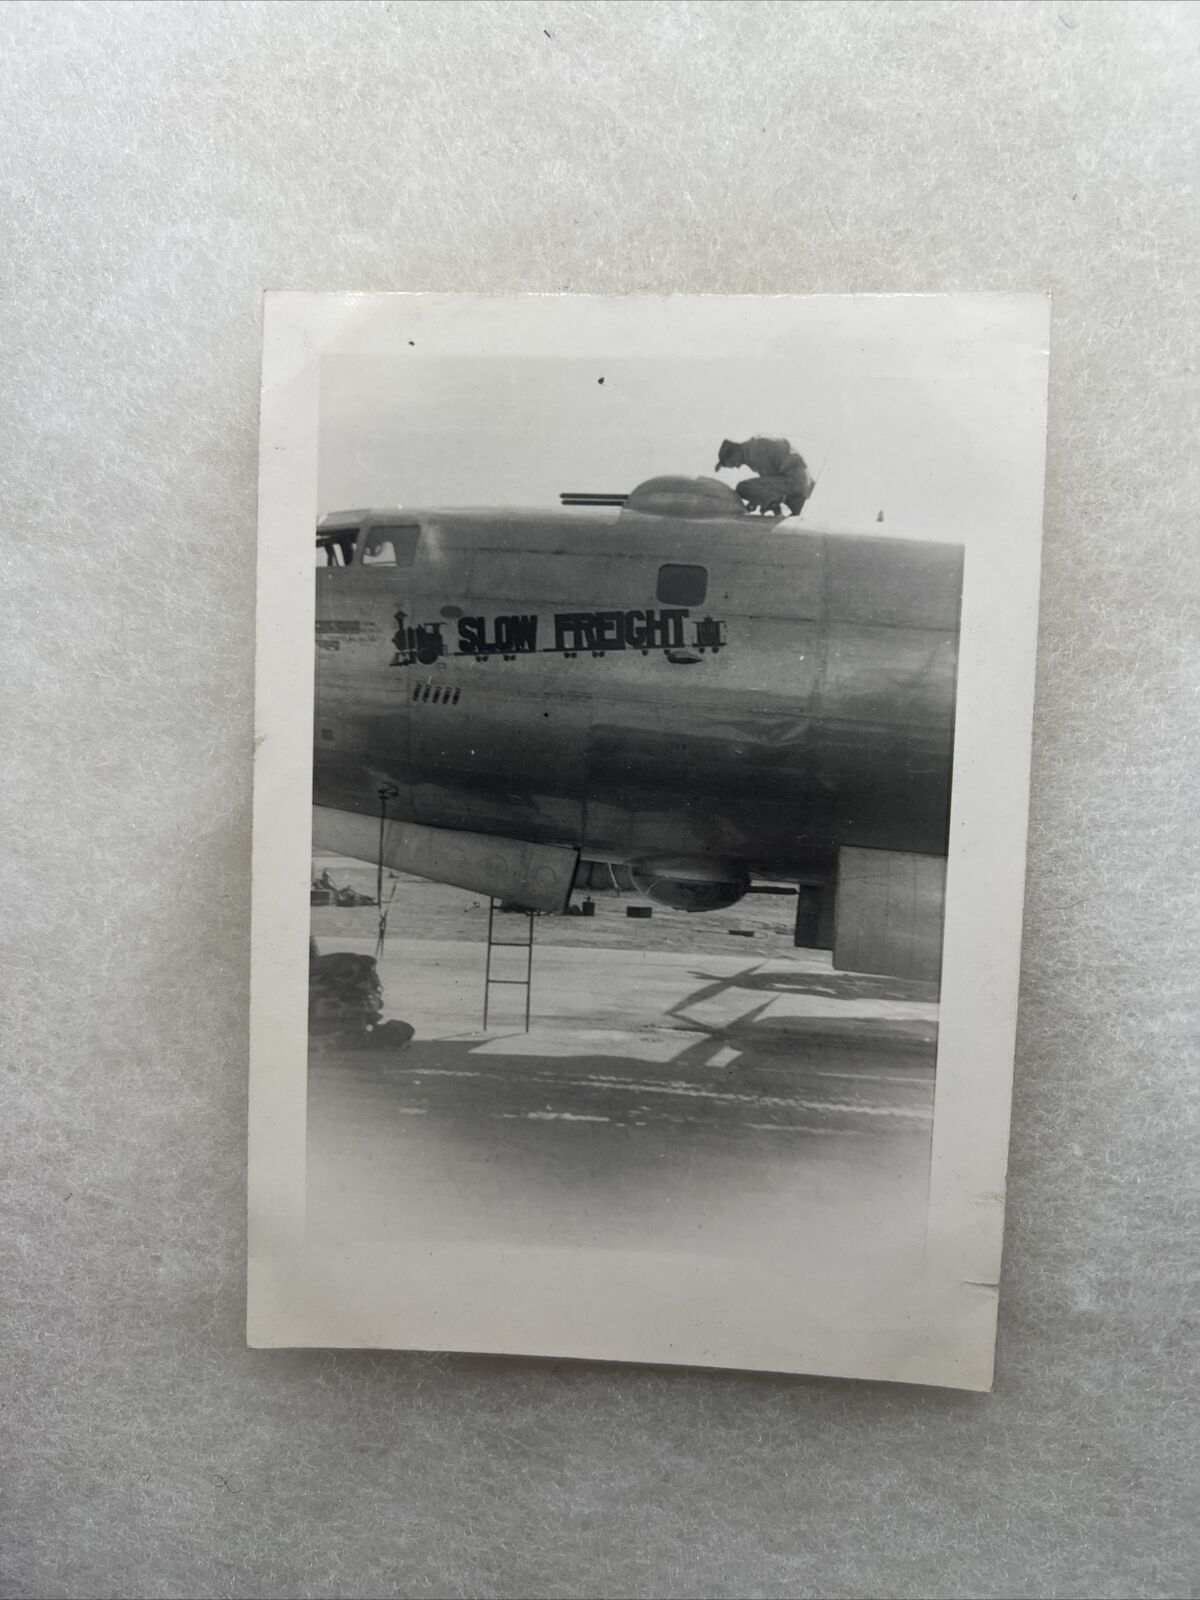 WW2 US Army Air Corps Nose Art “Slow Freight” Plane Photo (V90